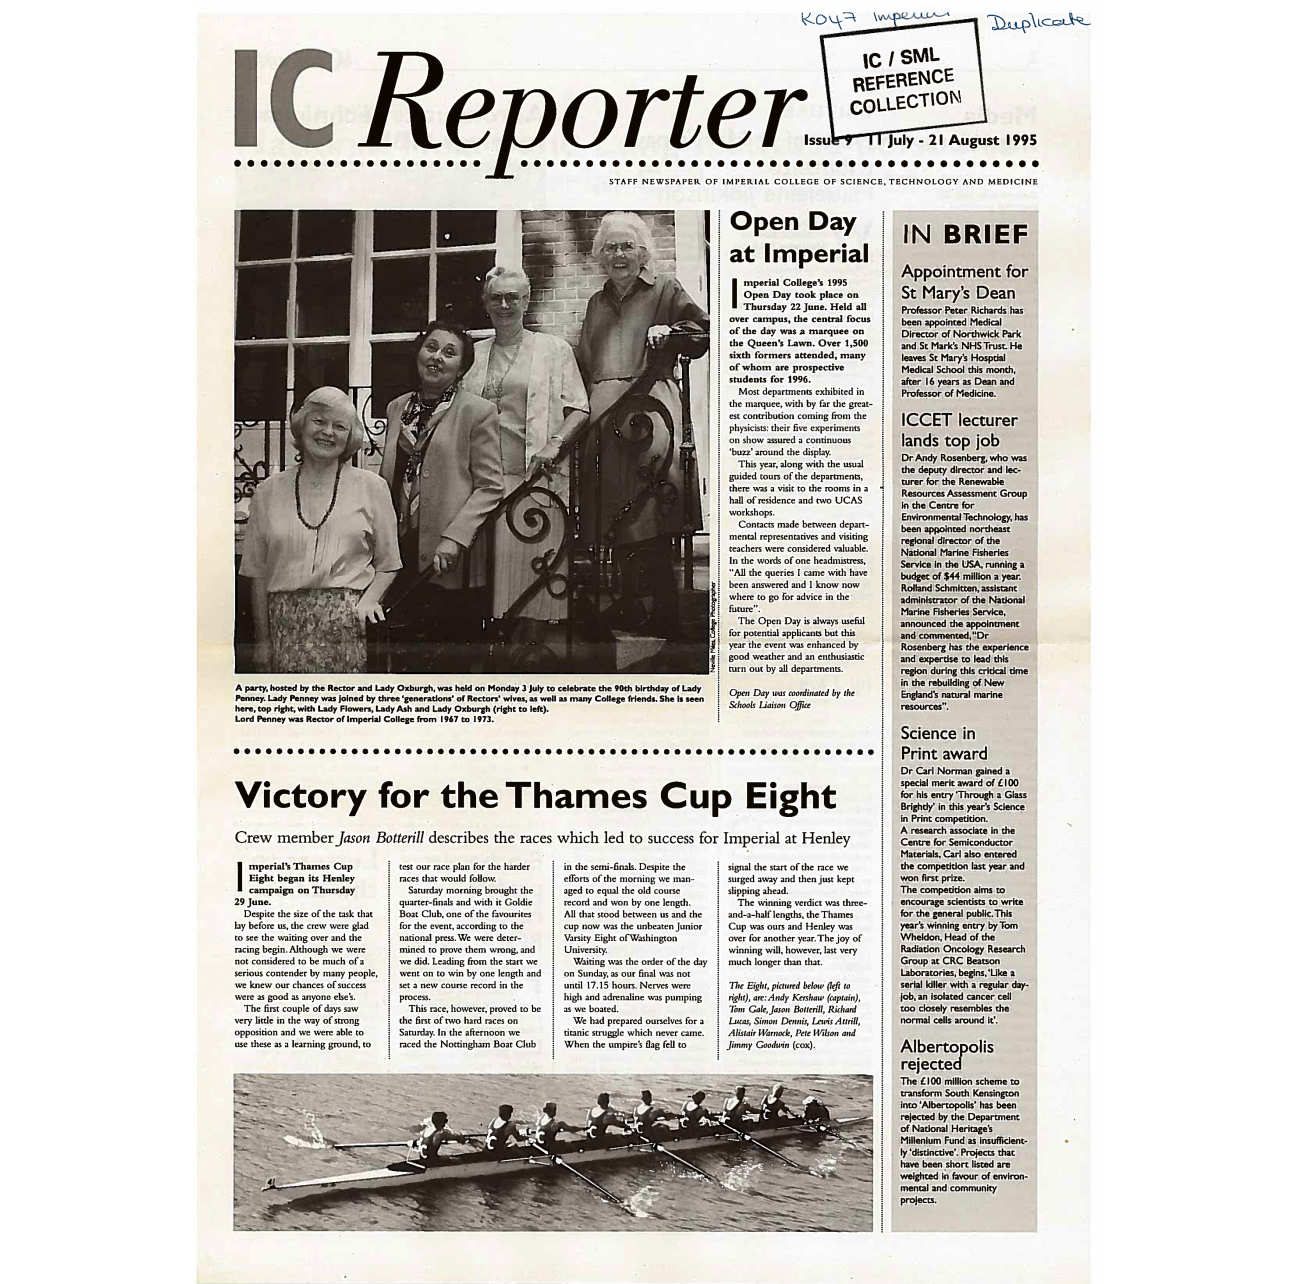 Issue 9, 11 July - 21 August 1995